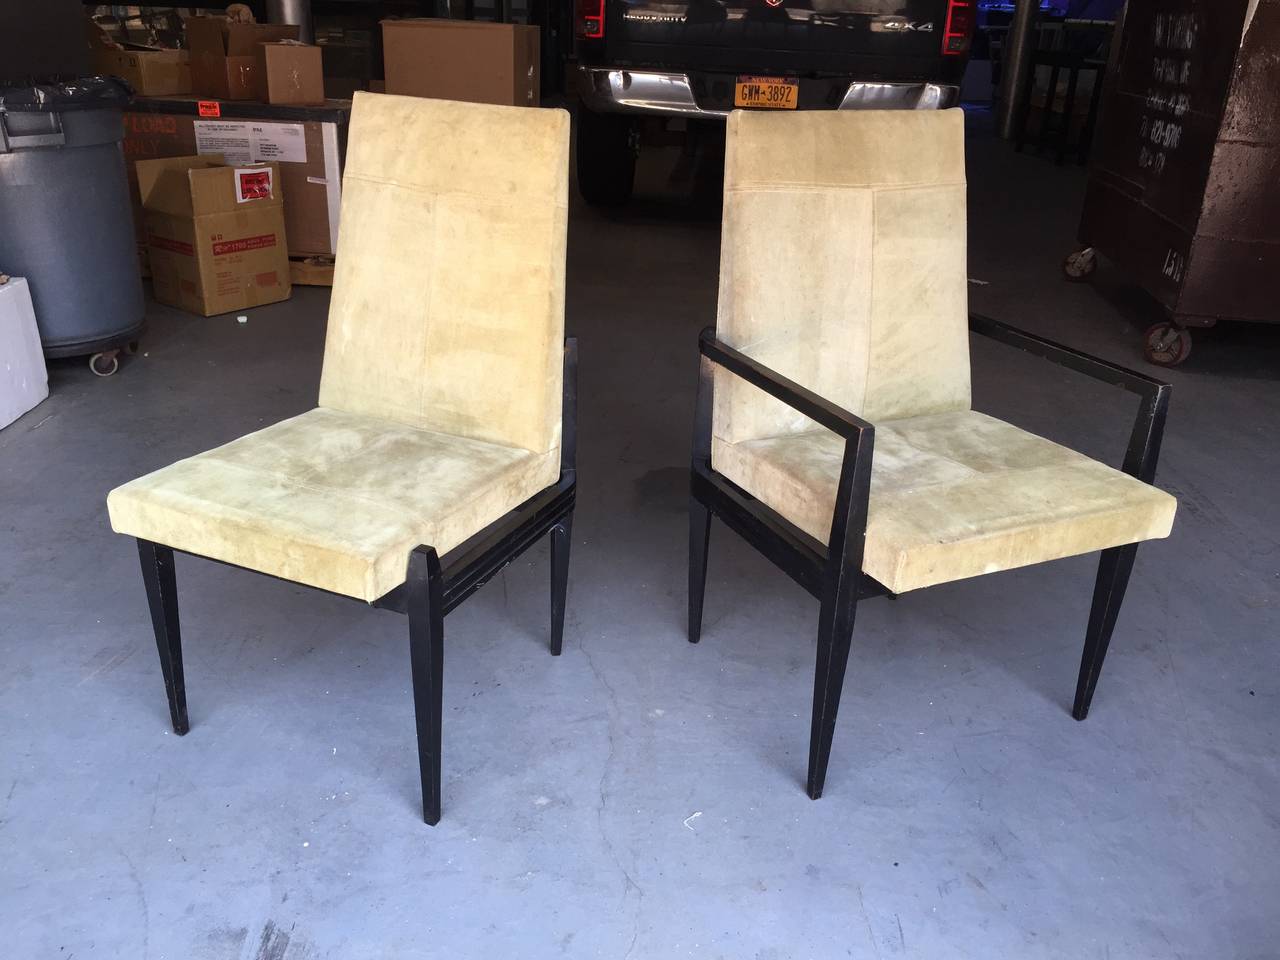 Architectural design chairs with rosewood frame and floating upholstered seat. Lovely brass details and wood carving. Pair of captains chairs and four side chairs. Can provide set of eight which require new upholstery. Original suede is in nice